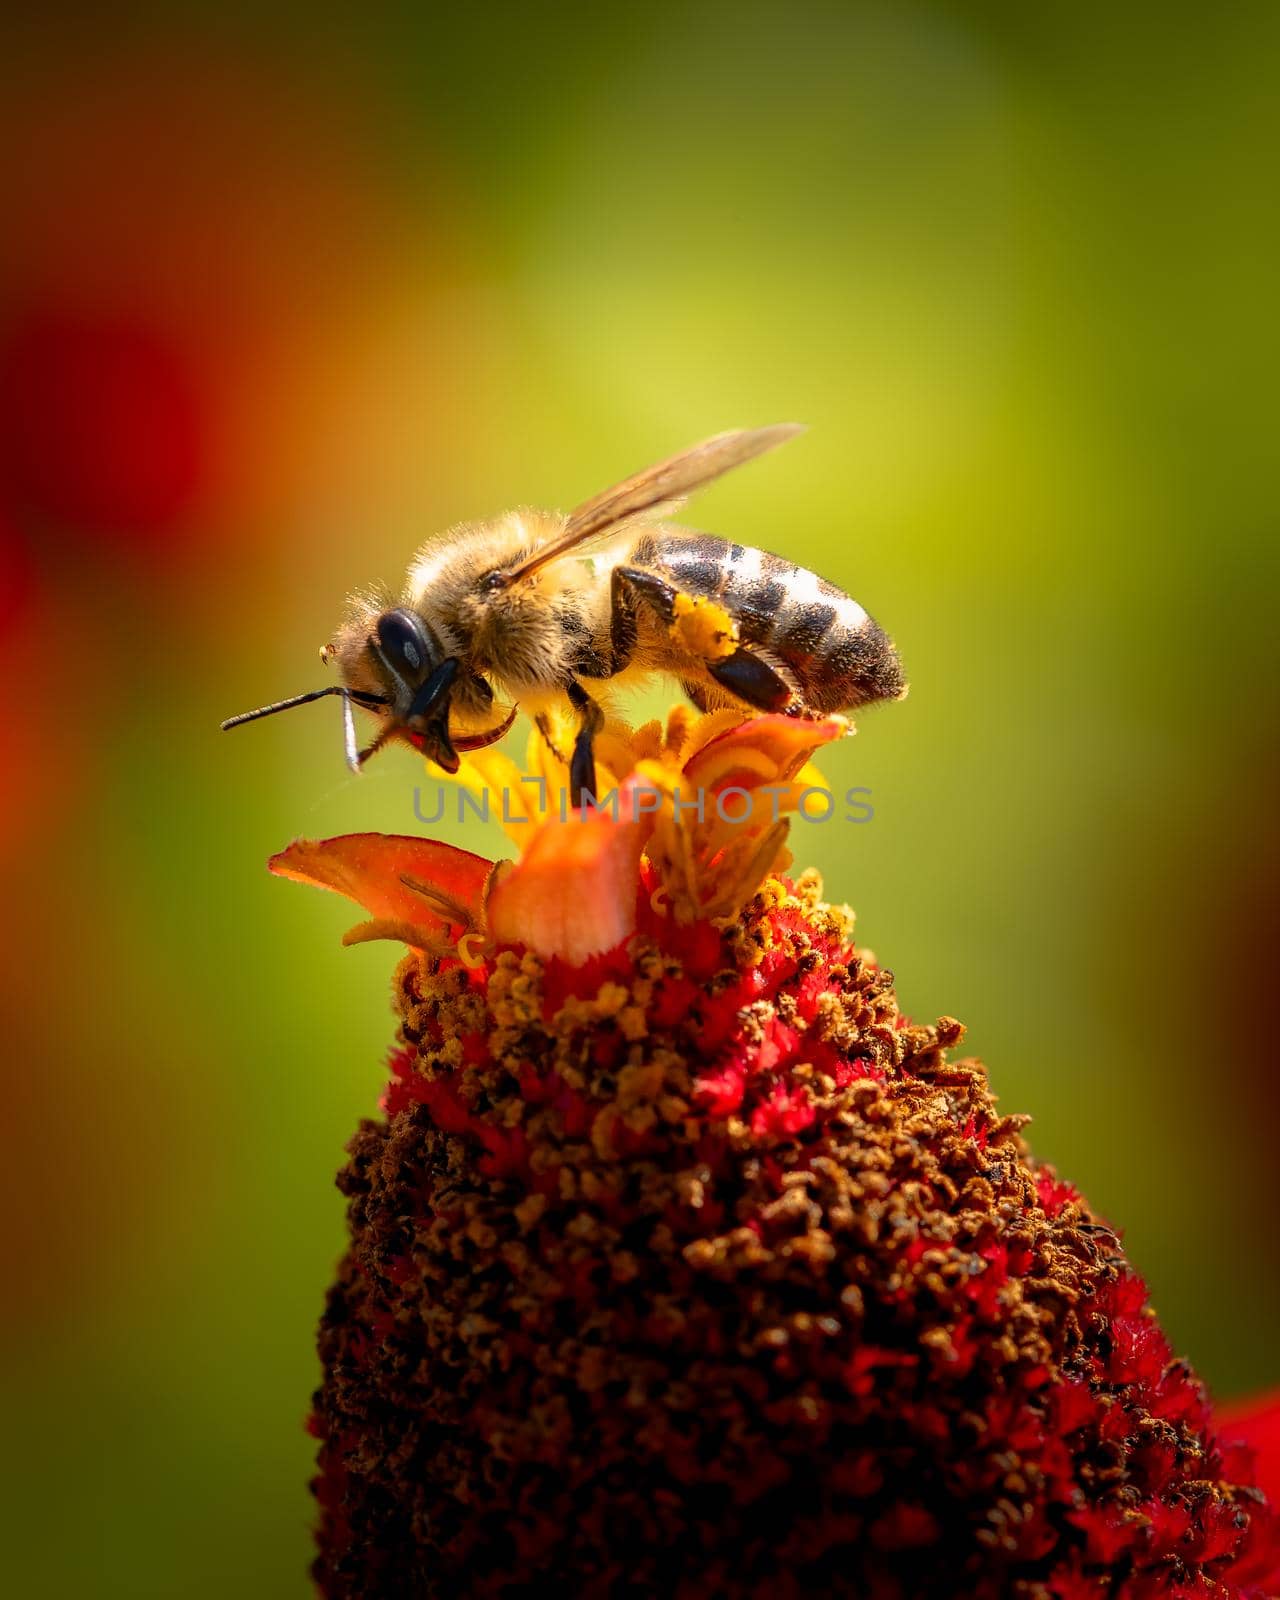 Pollinating bee landed on red flower, close-up photo of a bumblebee